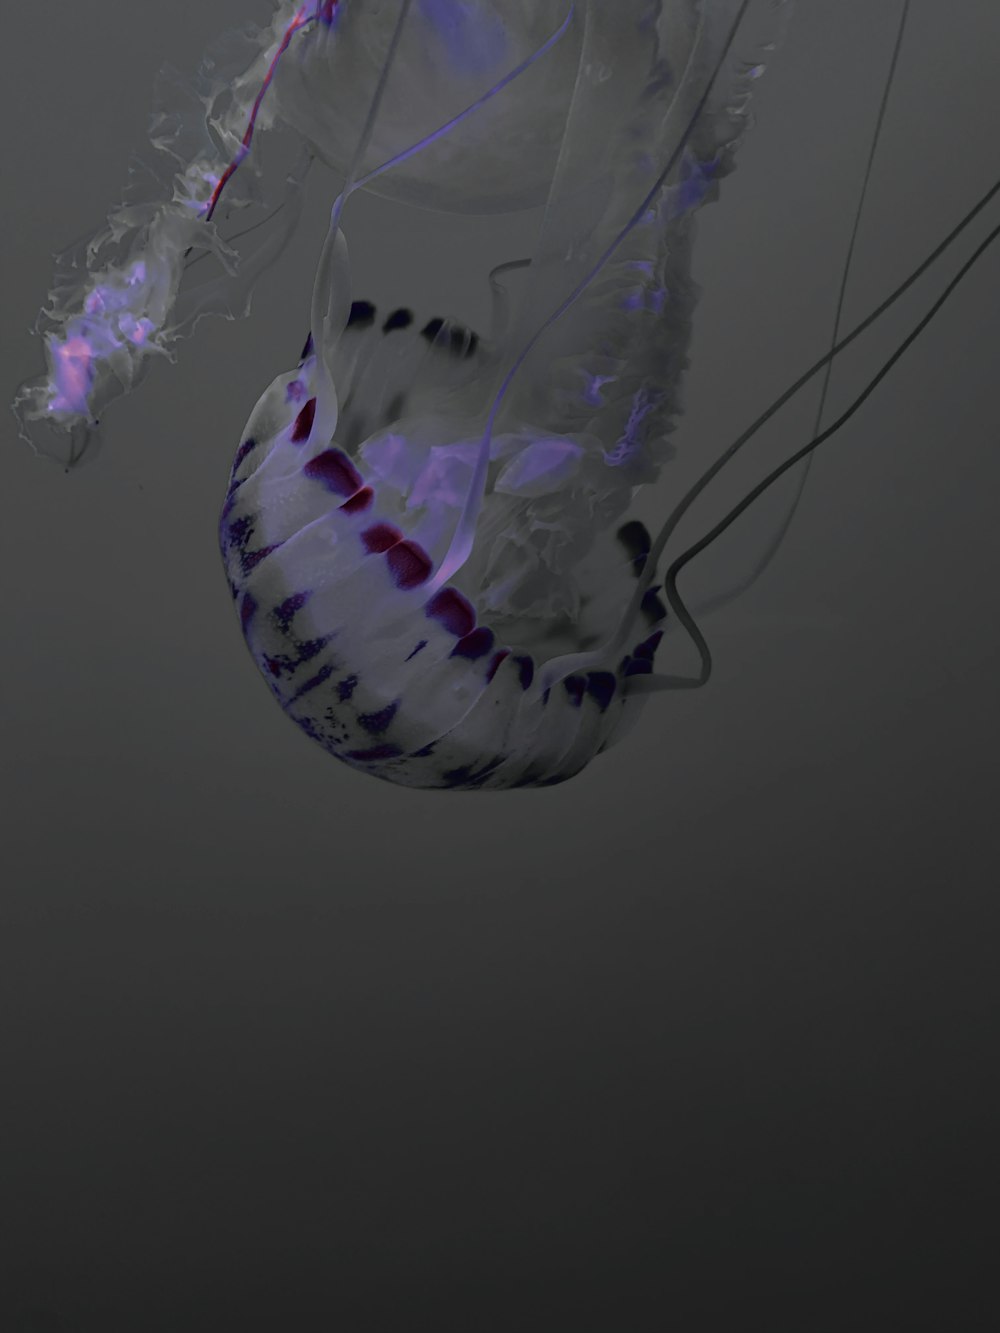 white and purple floating jelly fish